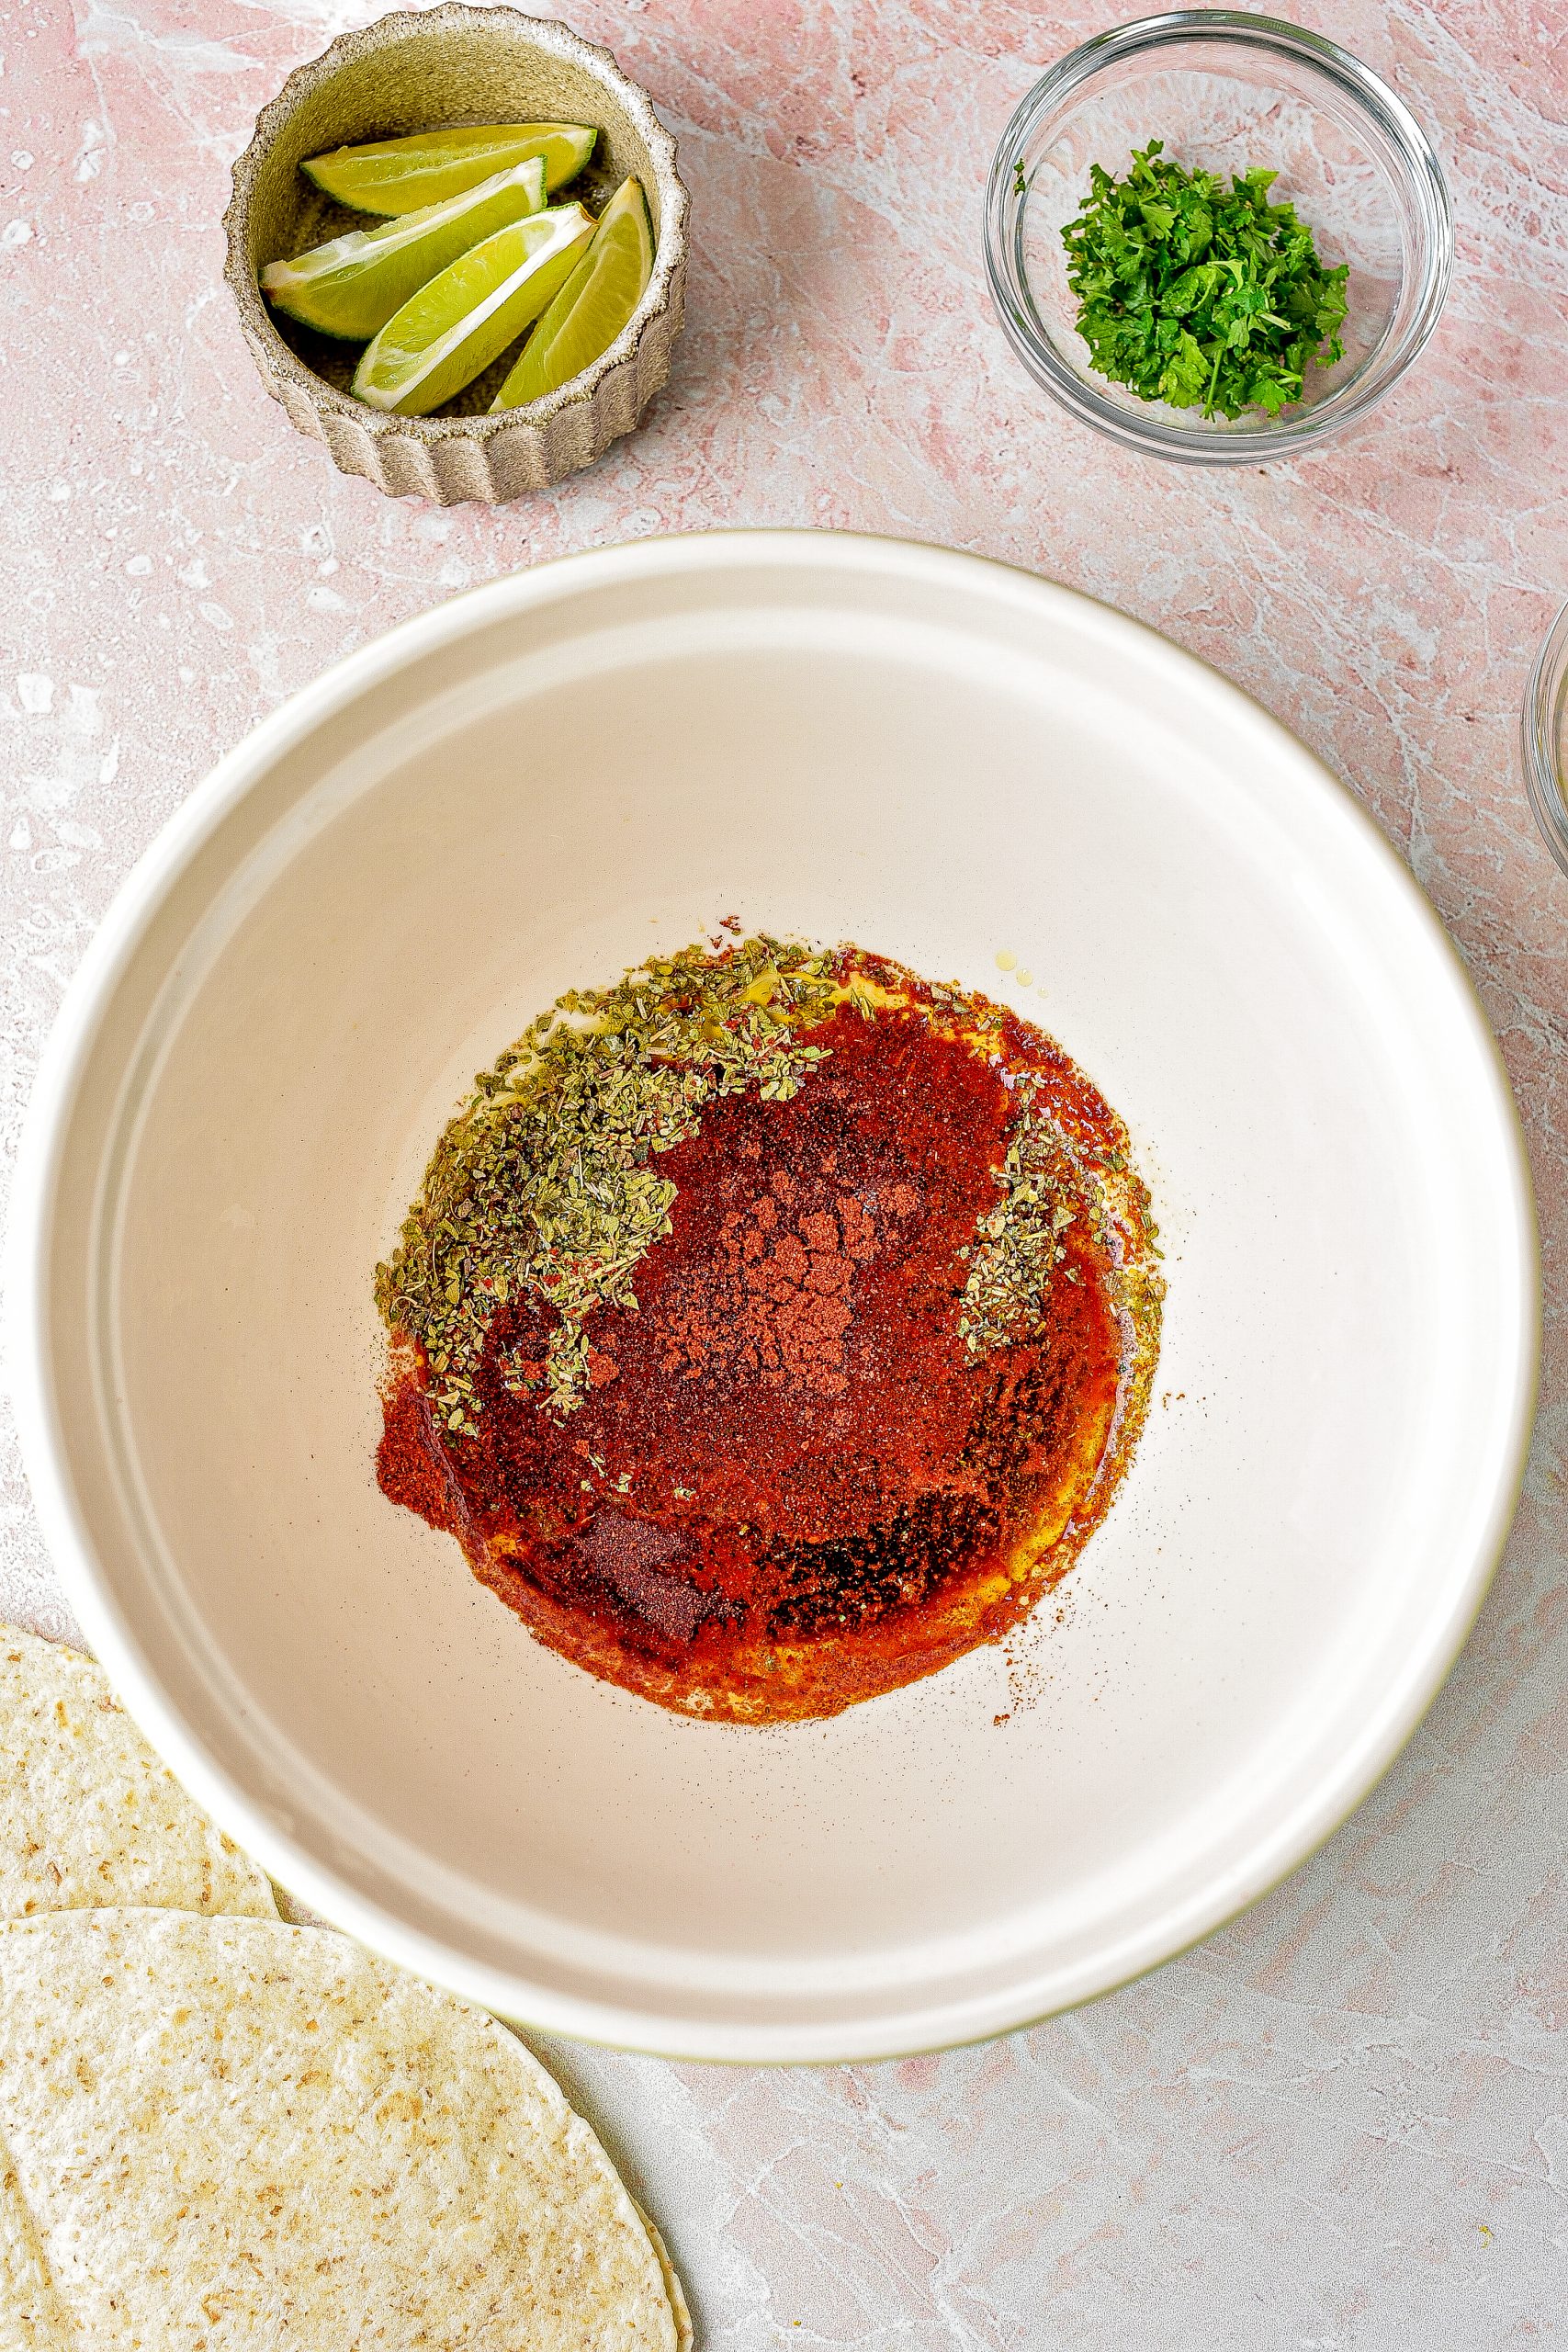 Mix together the oregano, lime juice, cumin, soy sauce, chili powder, and 1 tbsp oil in a bowl. 